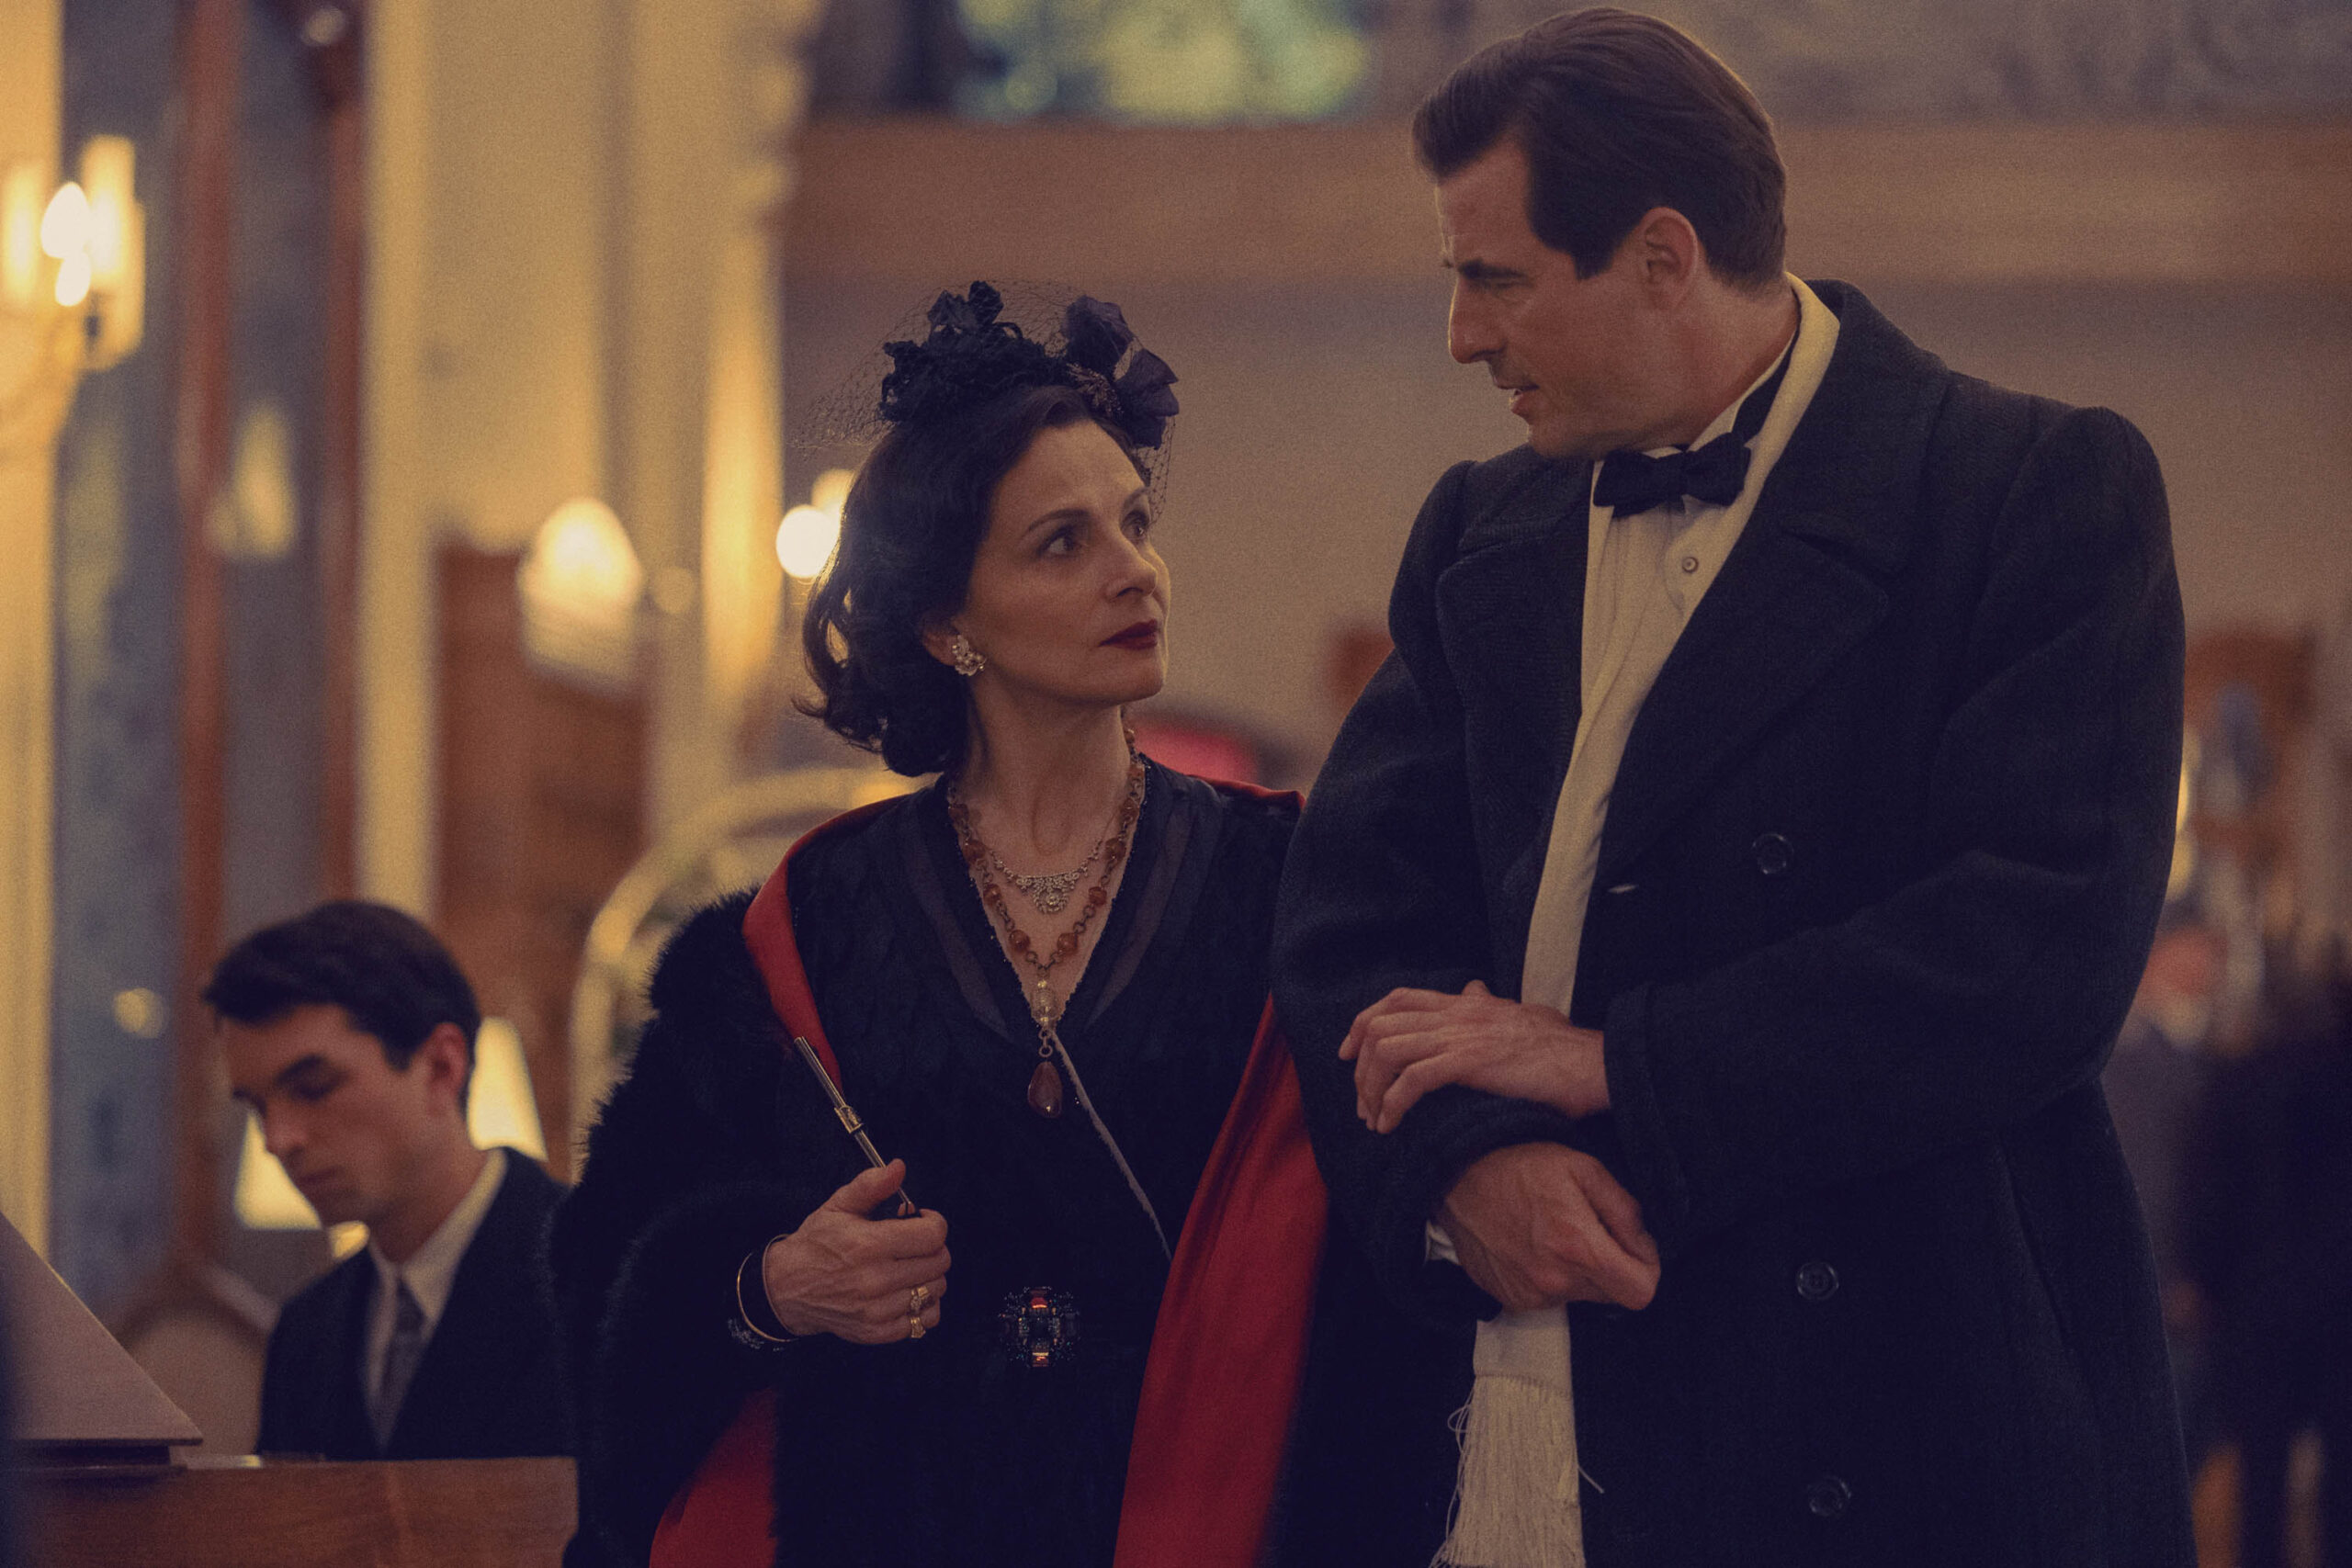 Juliette Binoche e Claes Bang in The New Look 1x01 [credit: Roger Do Minh; courtesy of Apple]